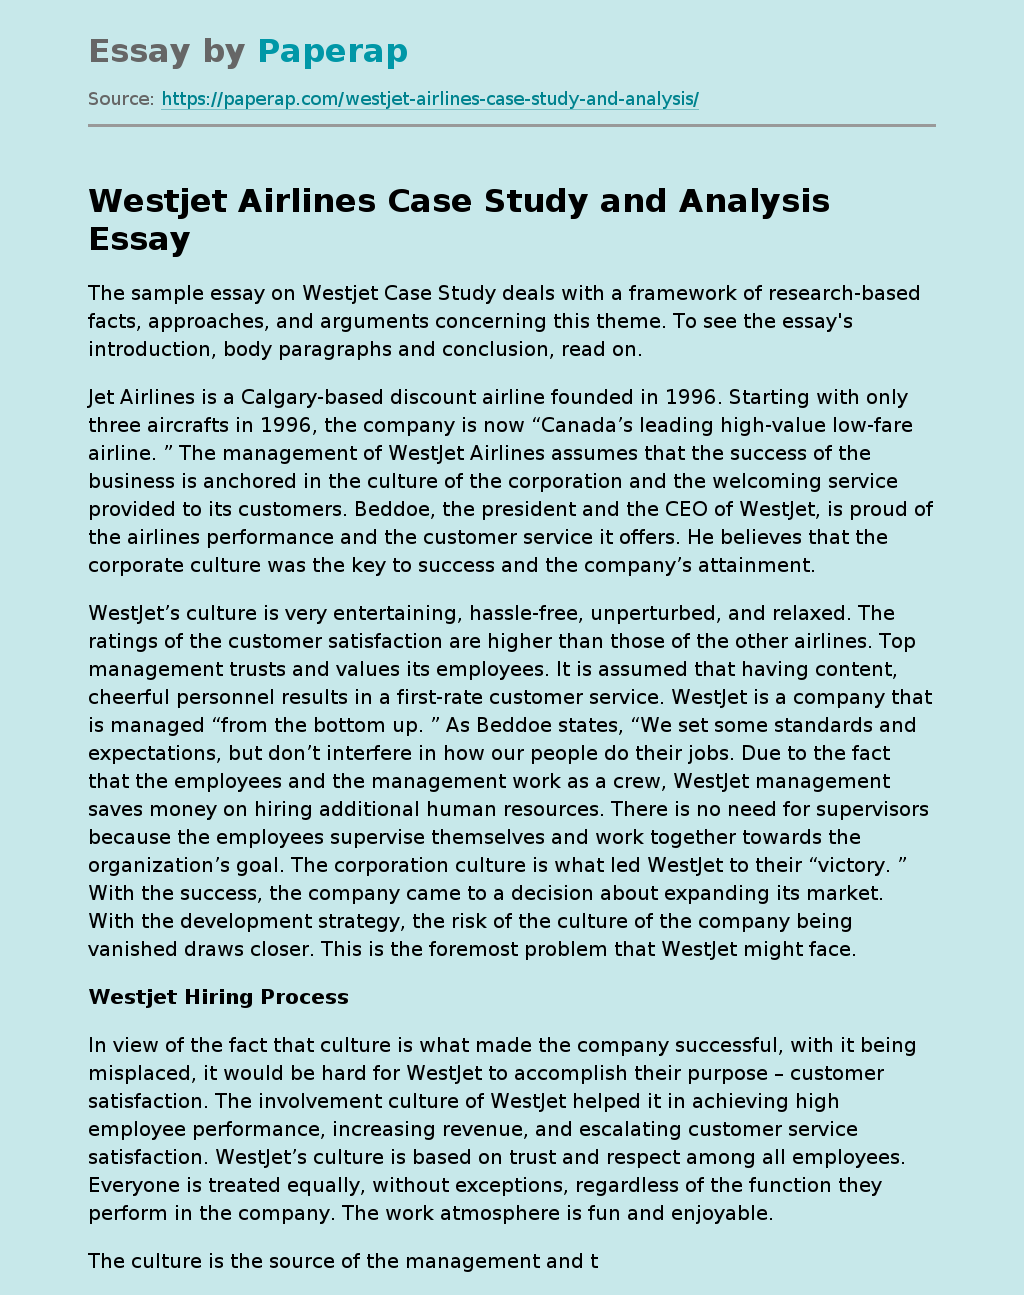 Westjet Airlines Case Study and Analysis